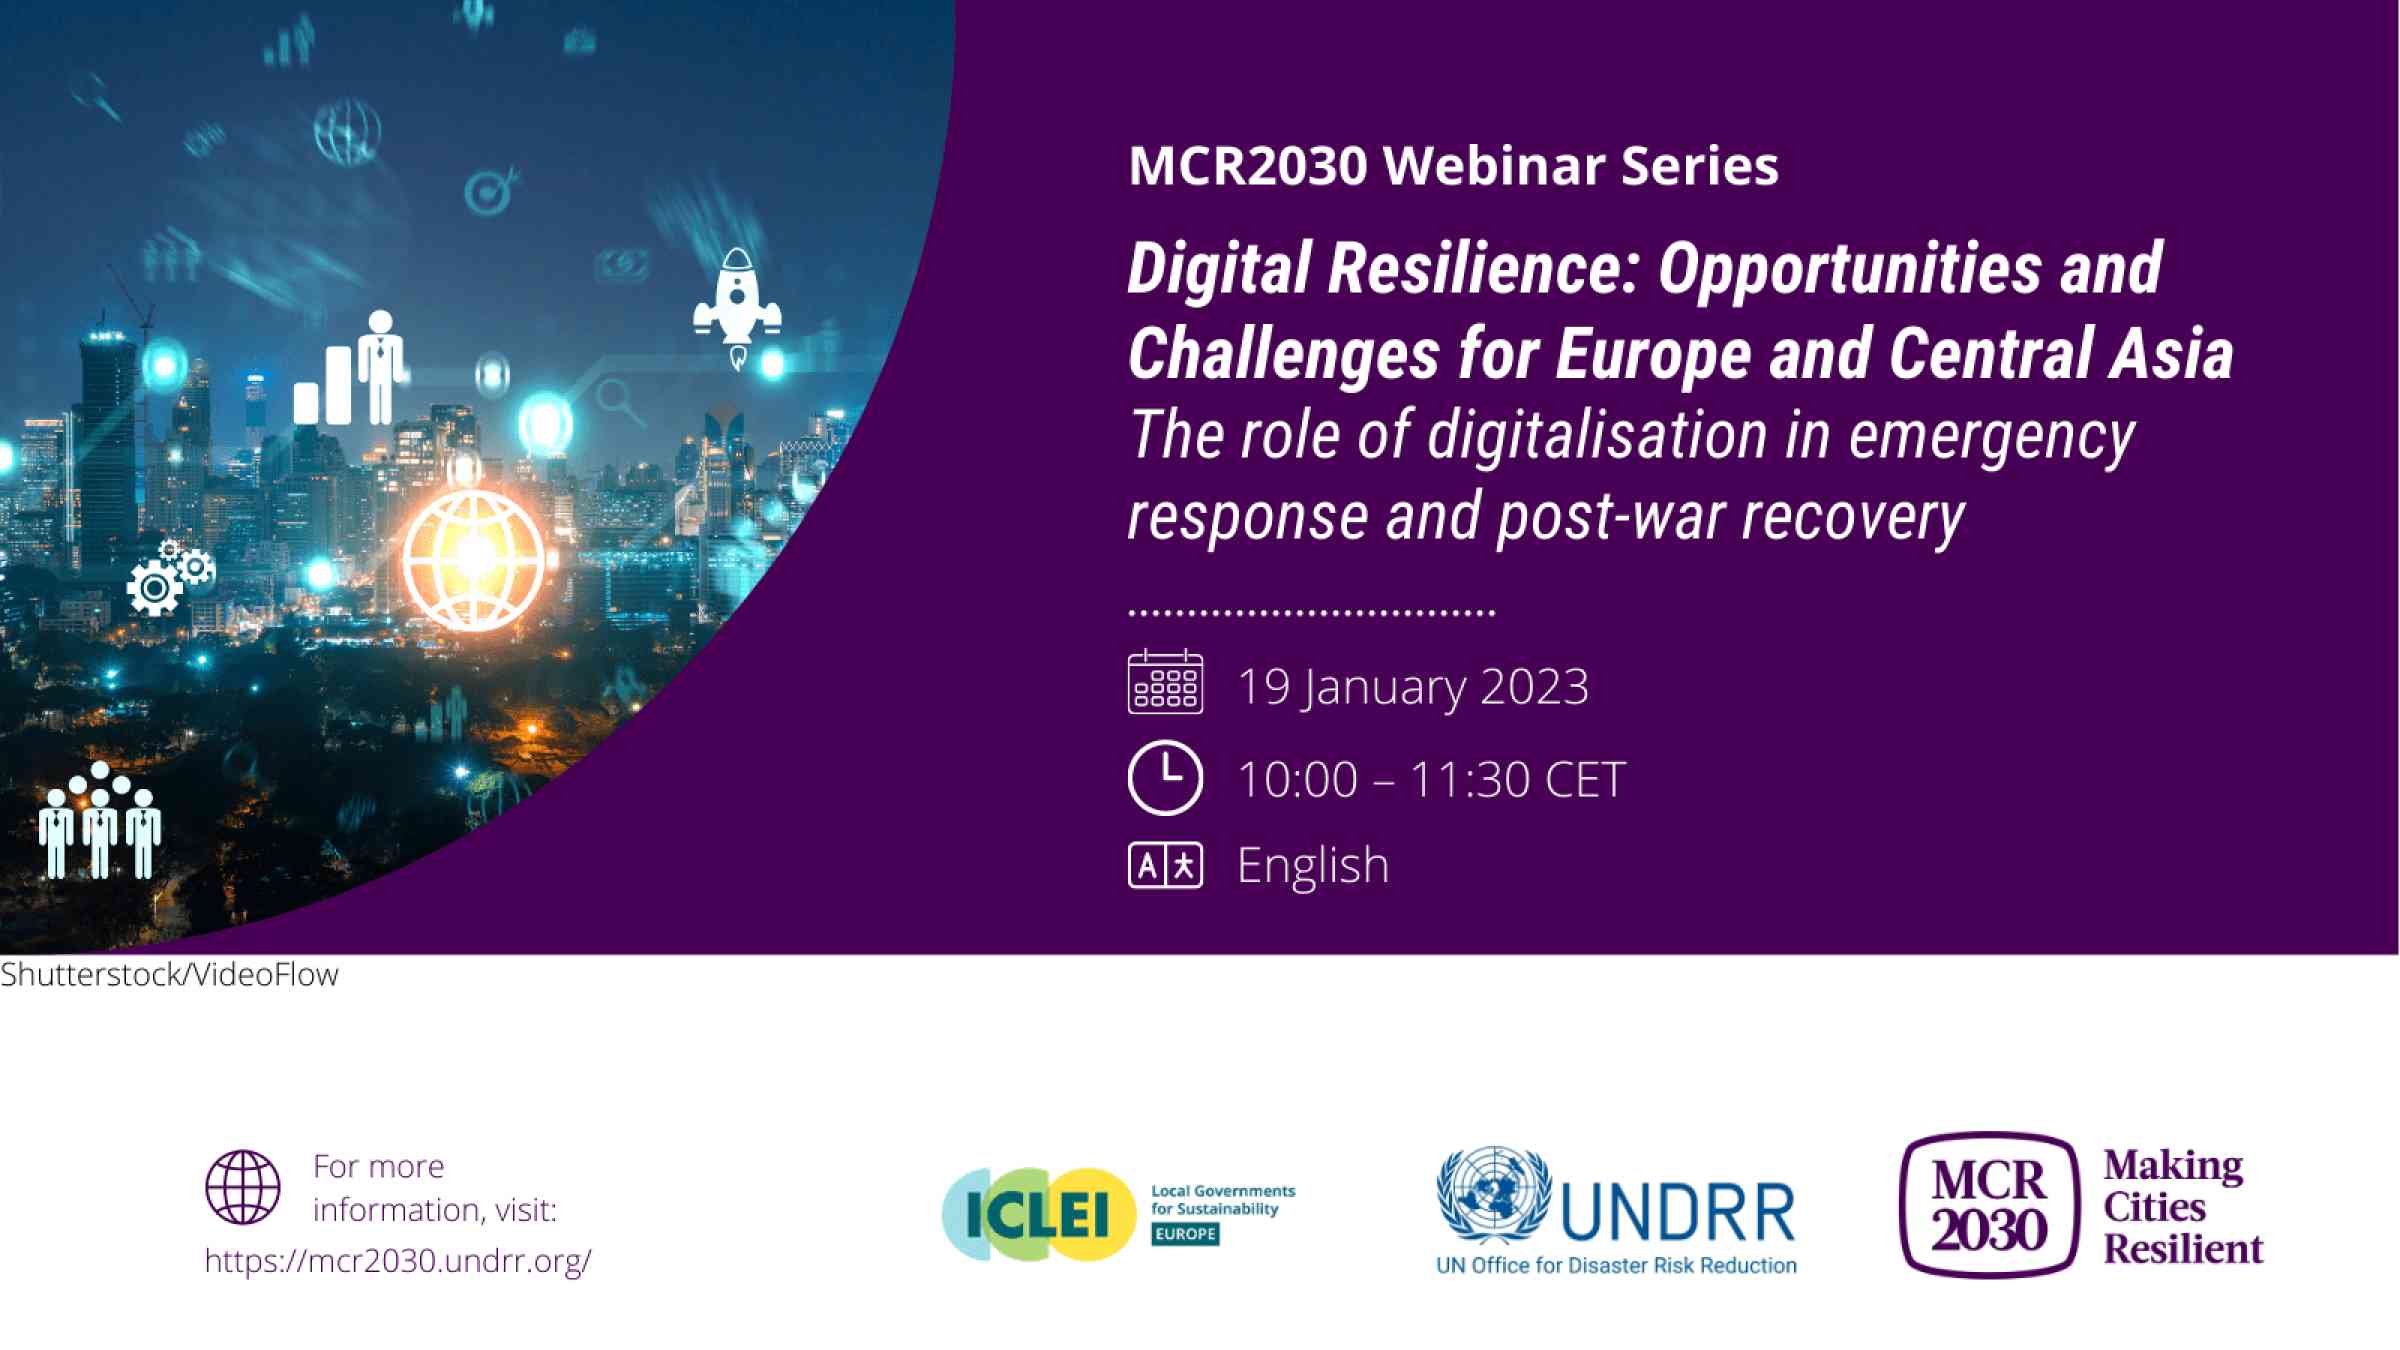 MCR2030 event flyer - Digital Resilience: Opportunities and Challenges for Europe and Central Asia